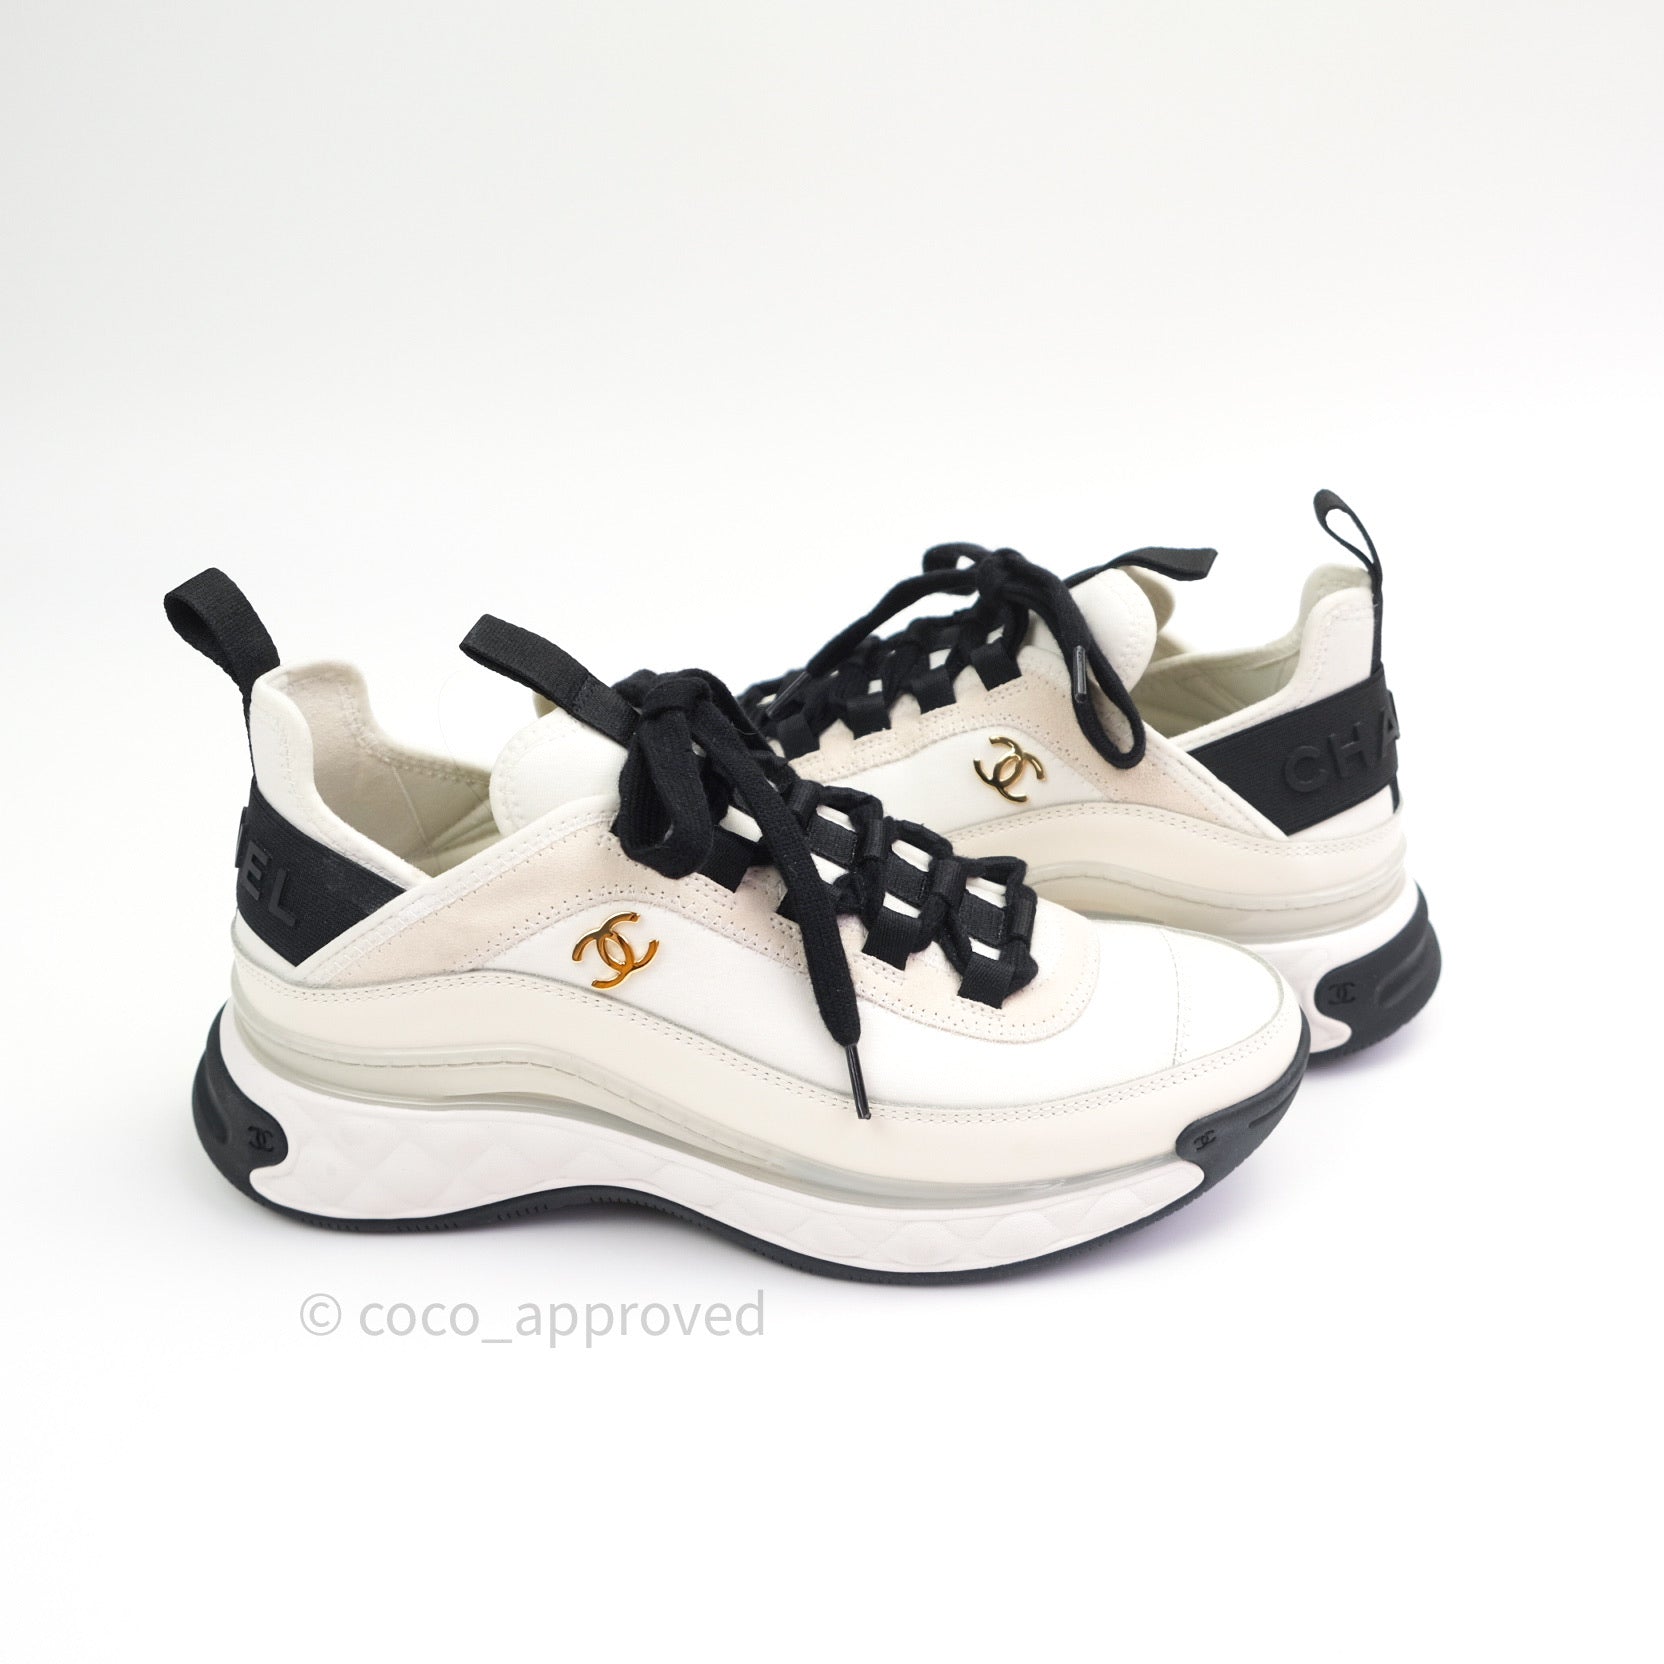 Chanel Sneakers White Coco Approved Studio